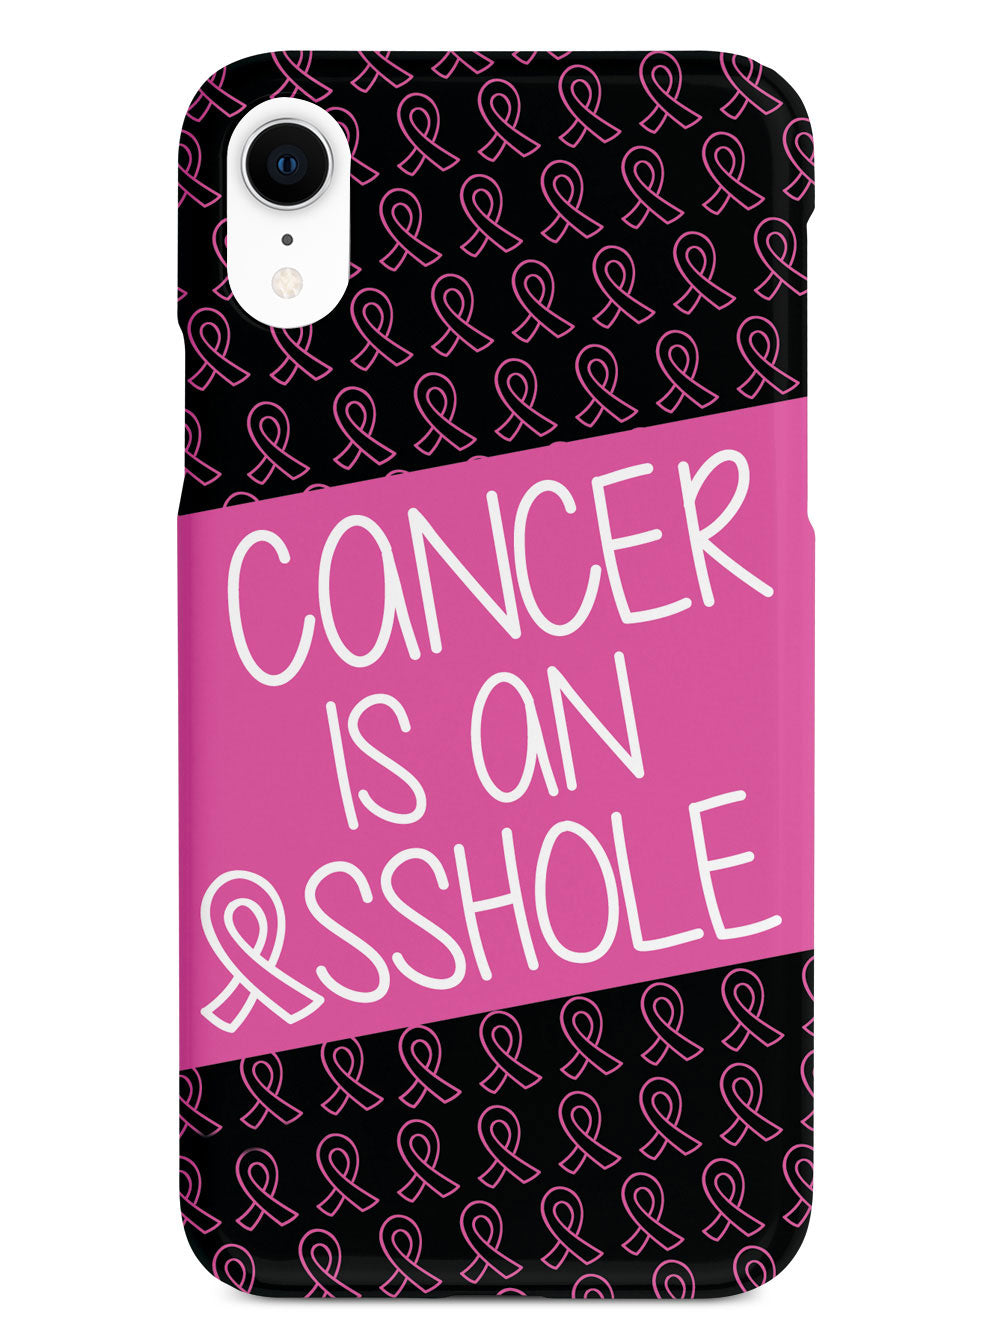 Cancer is an ASSHOLE Pink Case